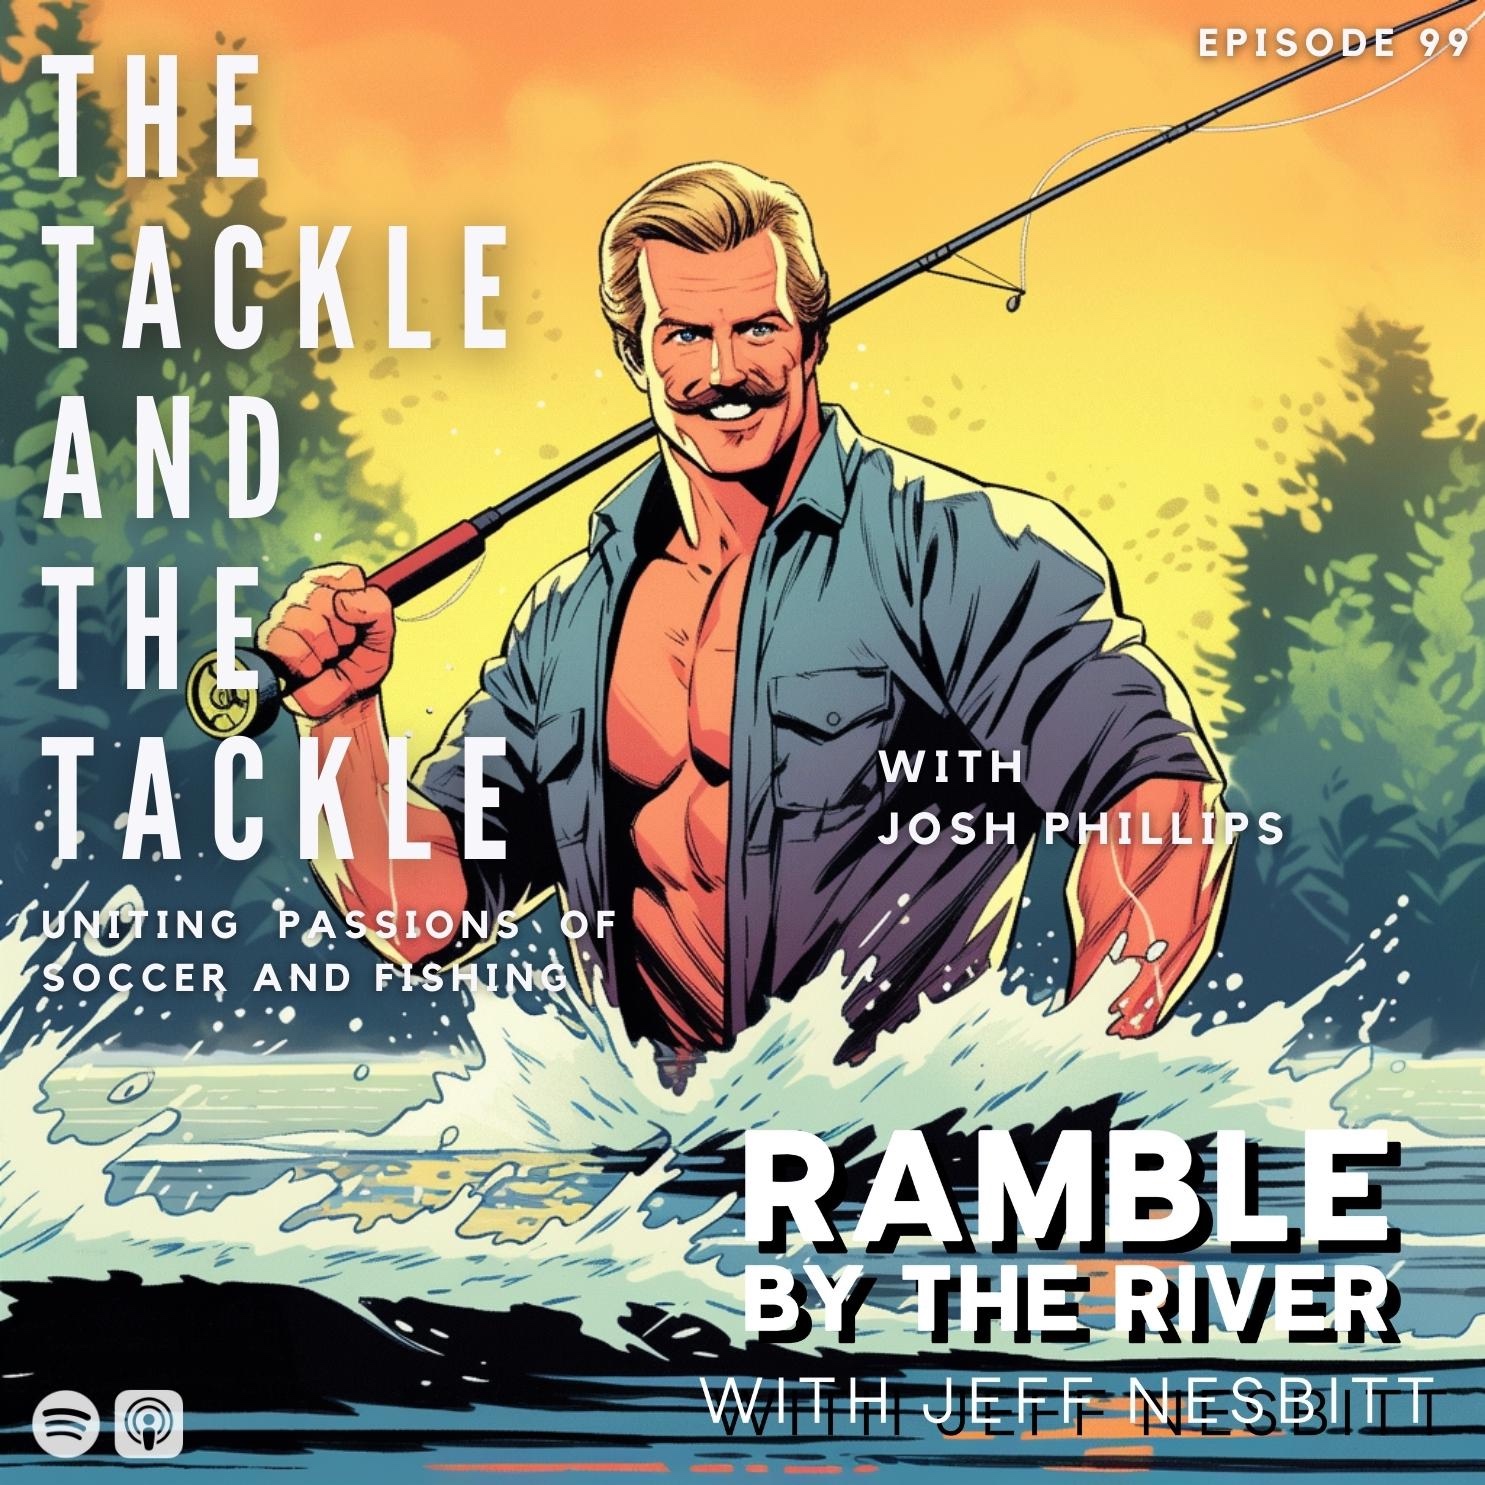 The Tackle and the Tackle: Uniting Passions of Soccer and Fishing with Josh Phillips